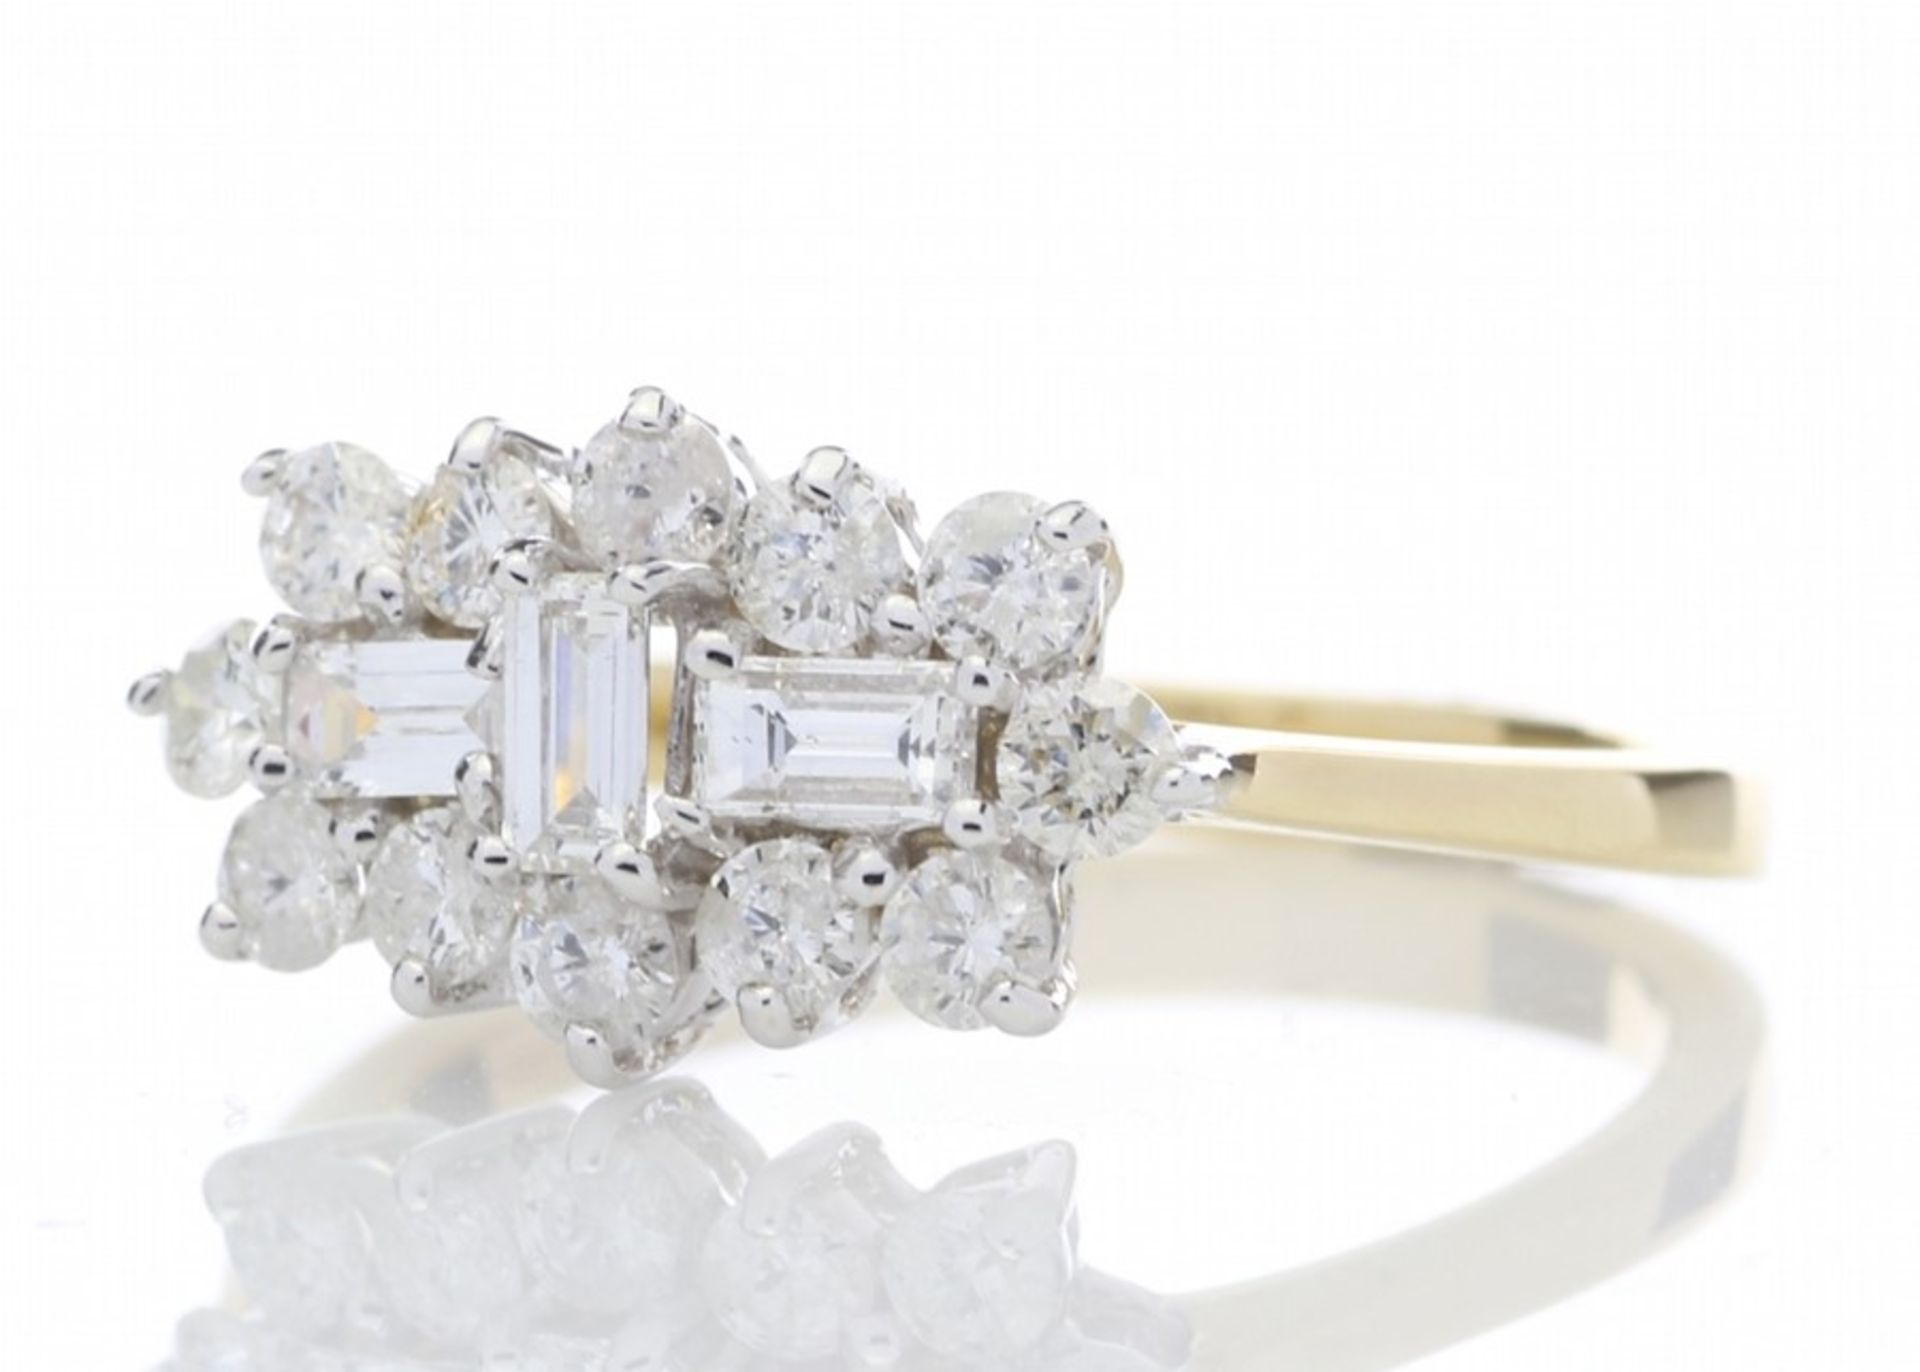 18ct Yellow Gold Boat Shape Diamond Cluster Ring 1.00 Carats - Valued by GIE £11,955.00 - Image 2 of 5